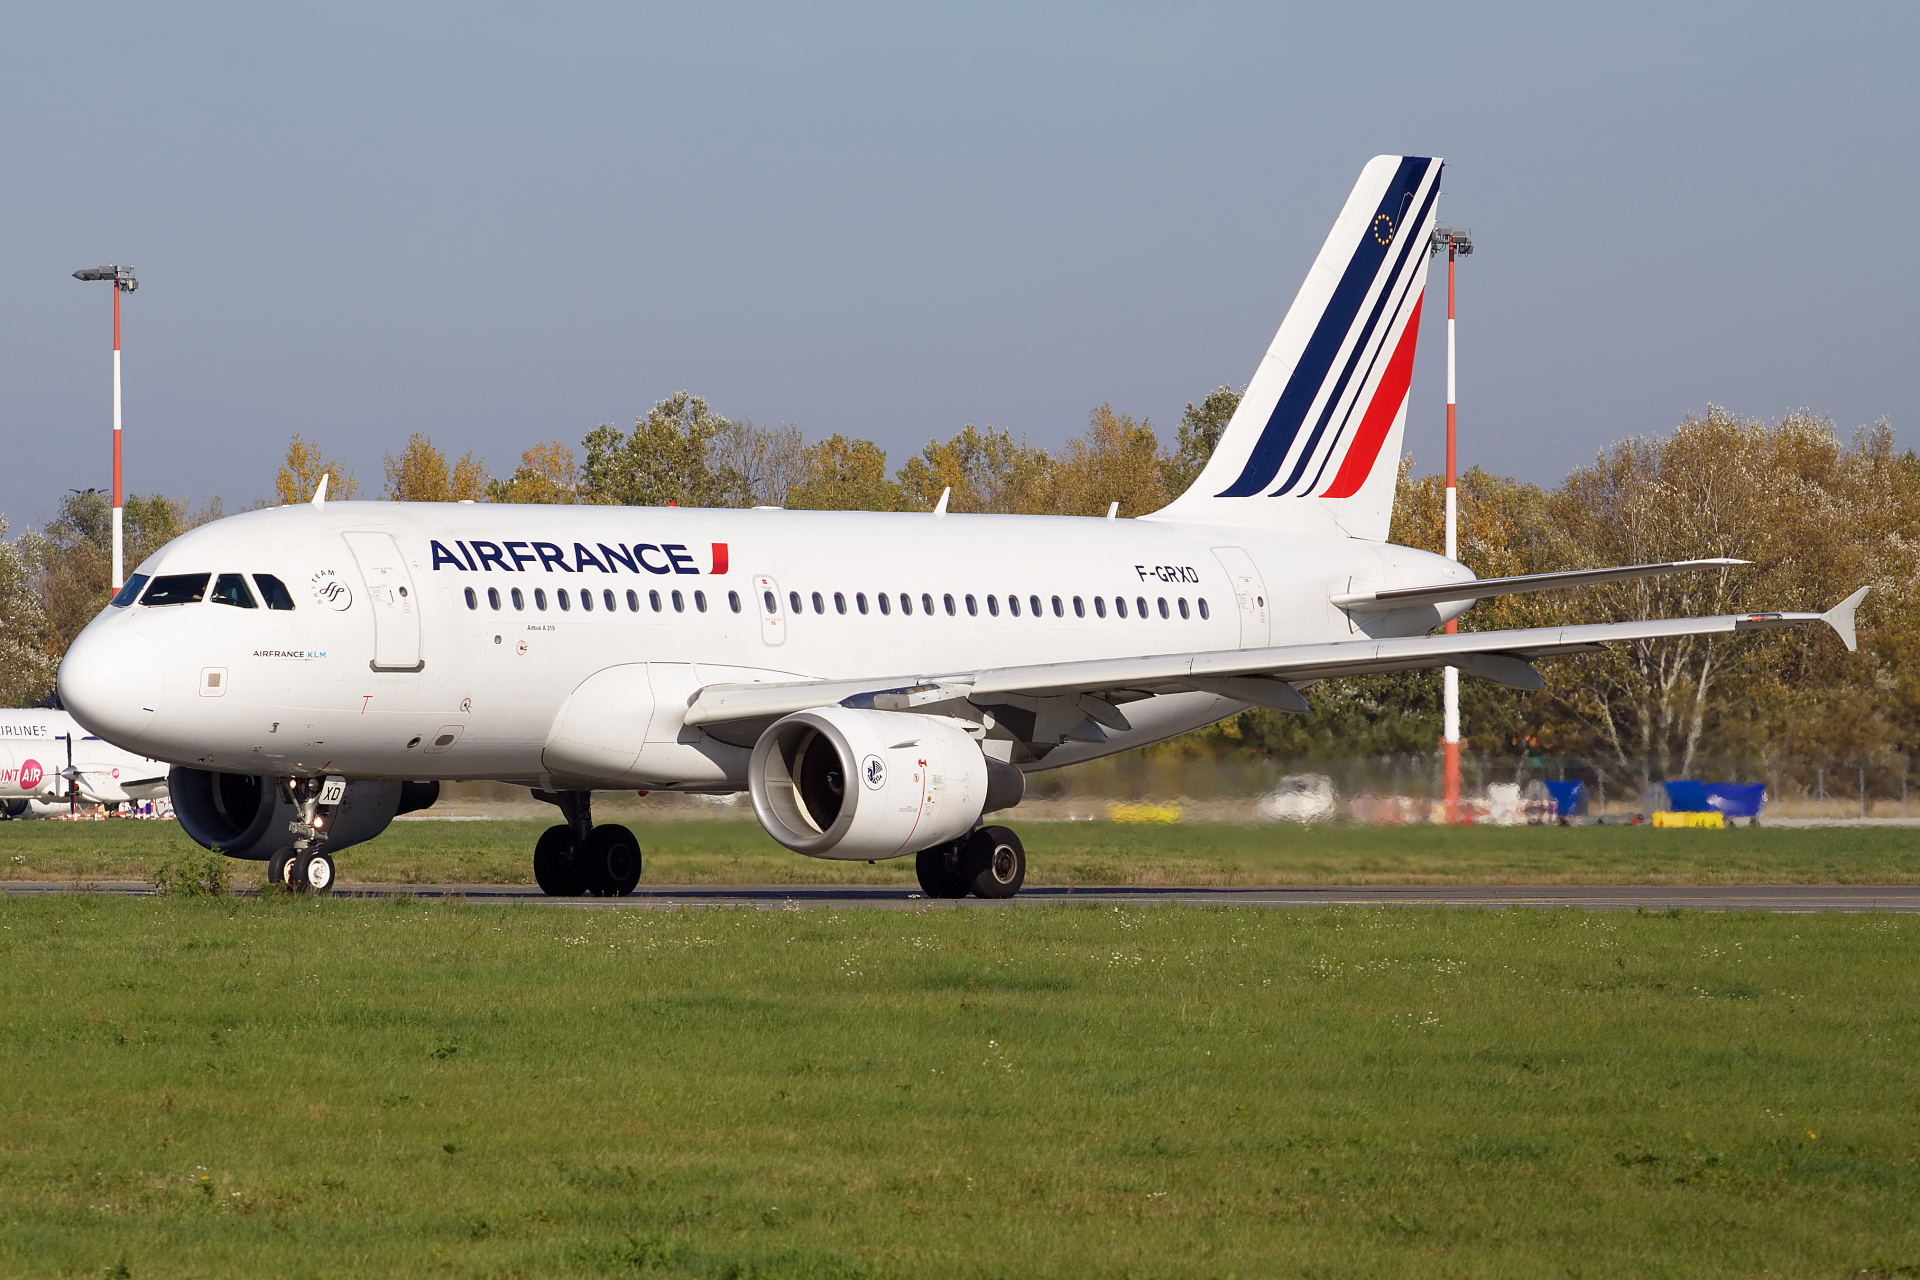 F-GRXD (new livery) (Aircraft » EPWA Spotting » Airbus A319-100 » Air France)